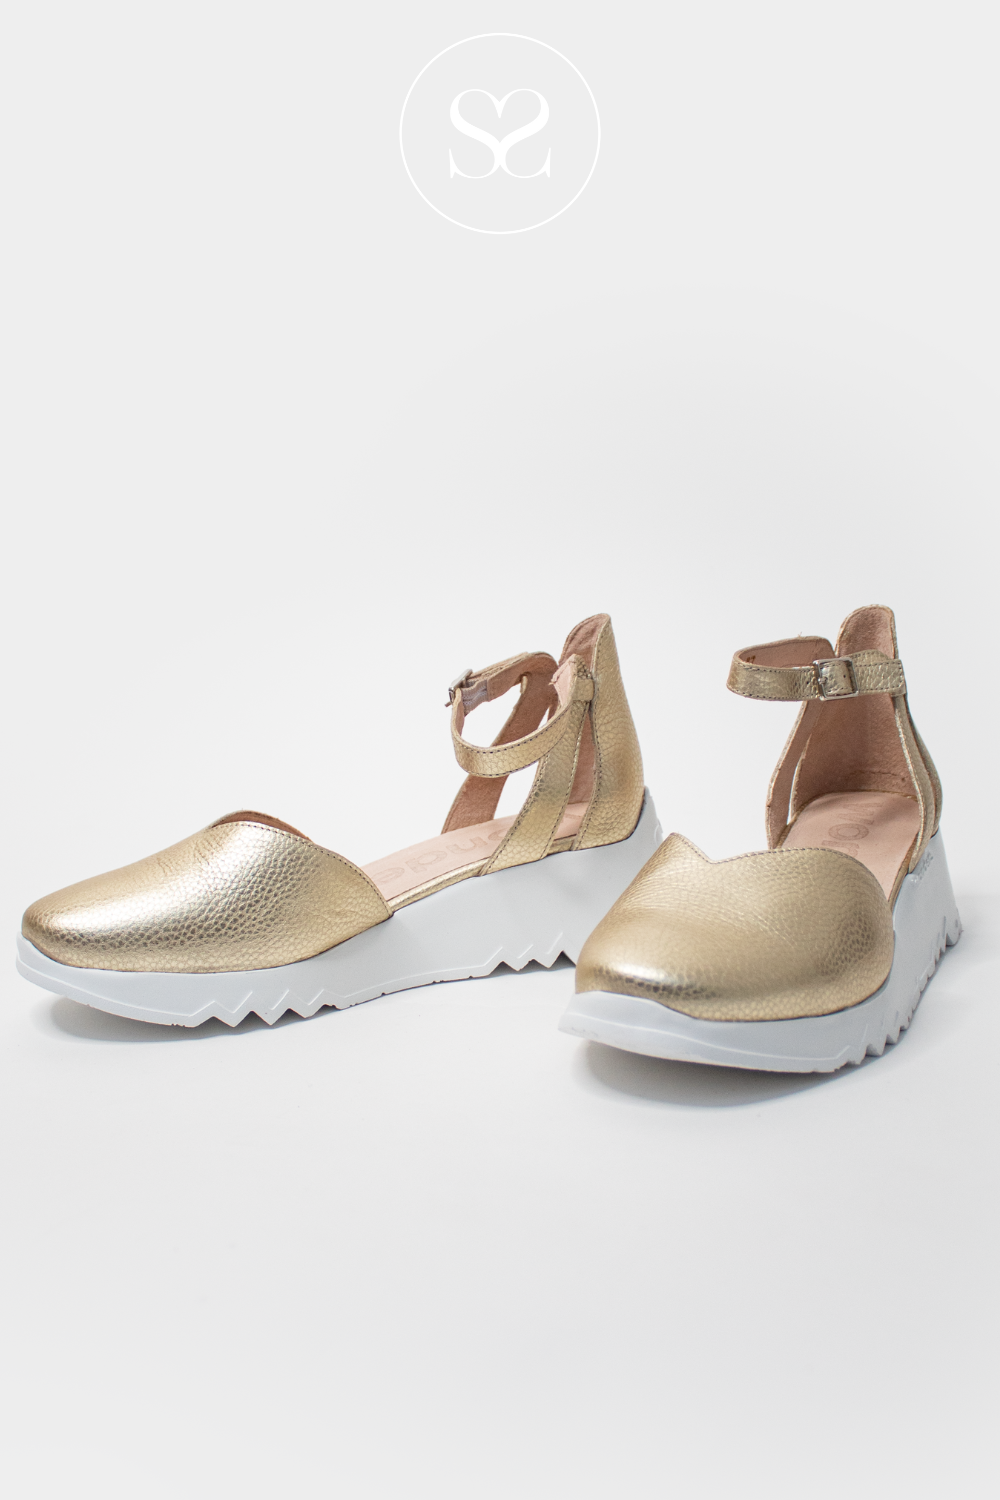 WONDERS E-6703 GOLD LEATHER CLOSED TOE WEDGE SANDALS WITH ADJUSTABLE ANKLE STRAP